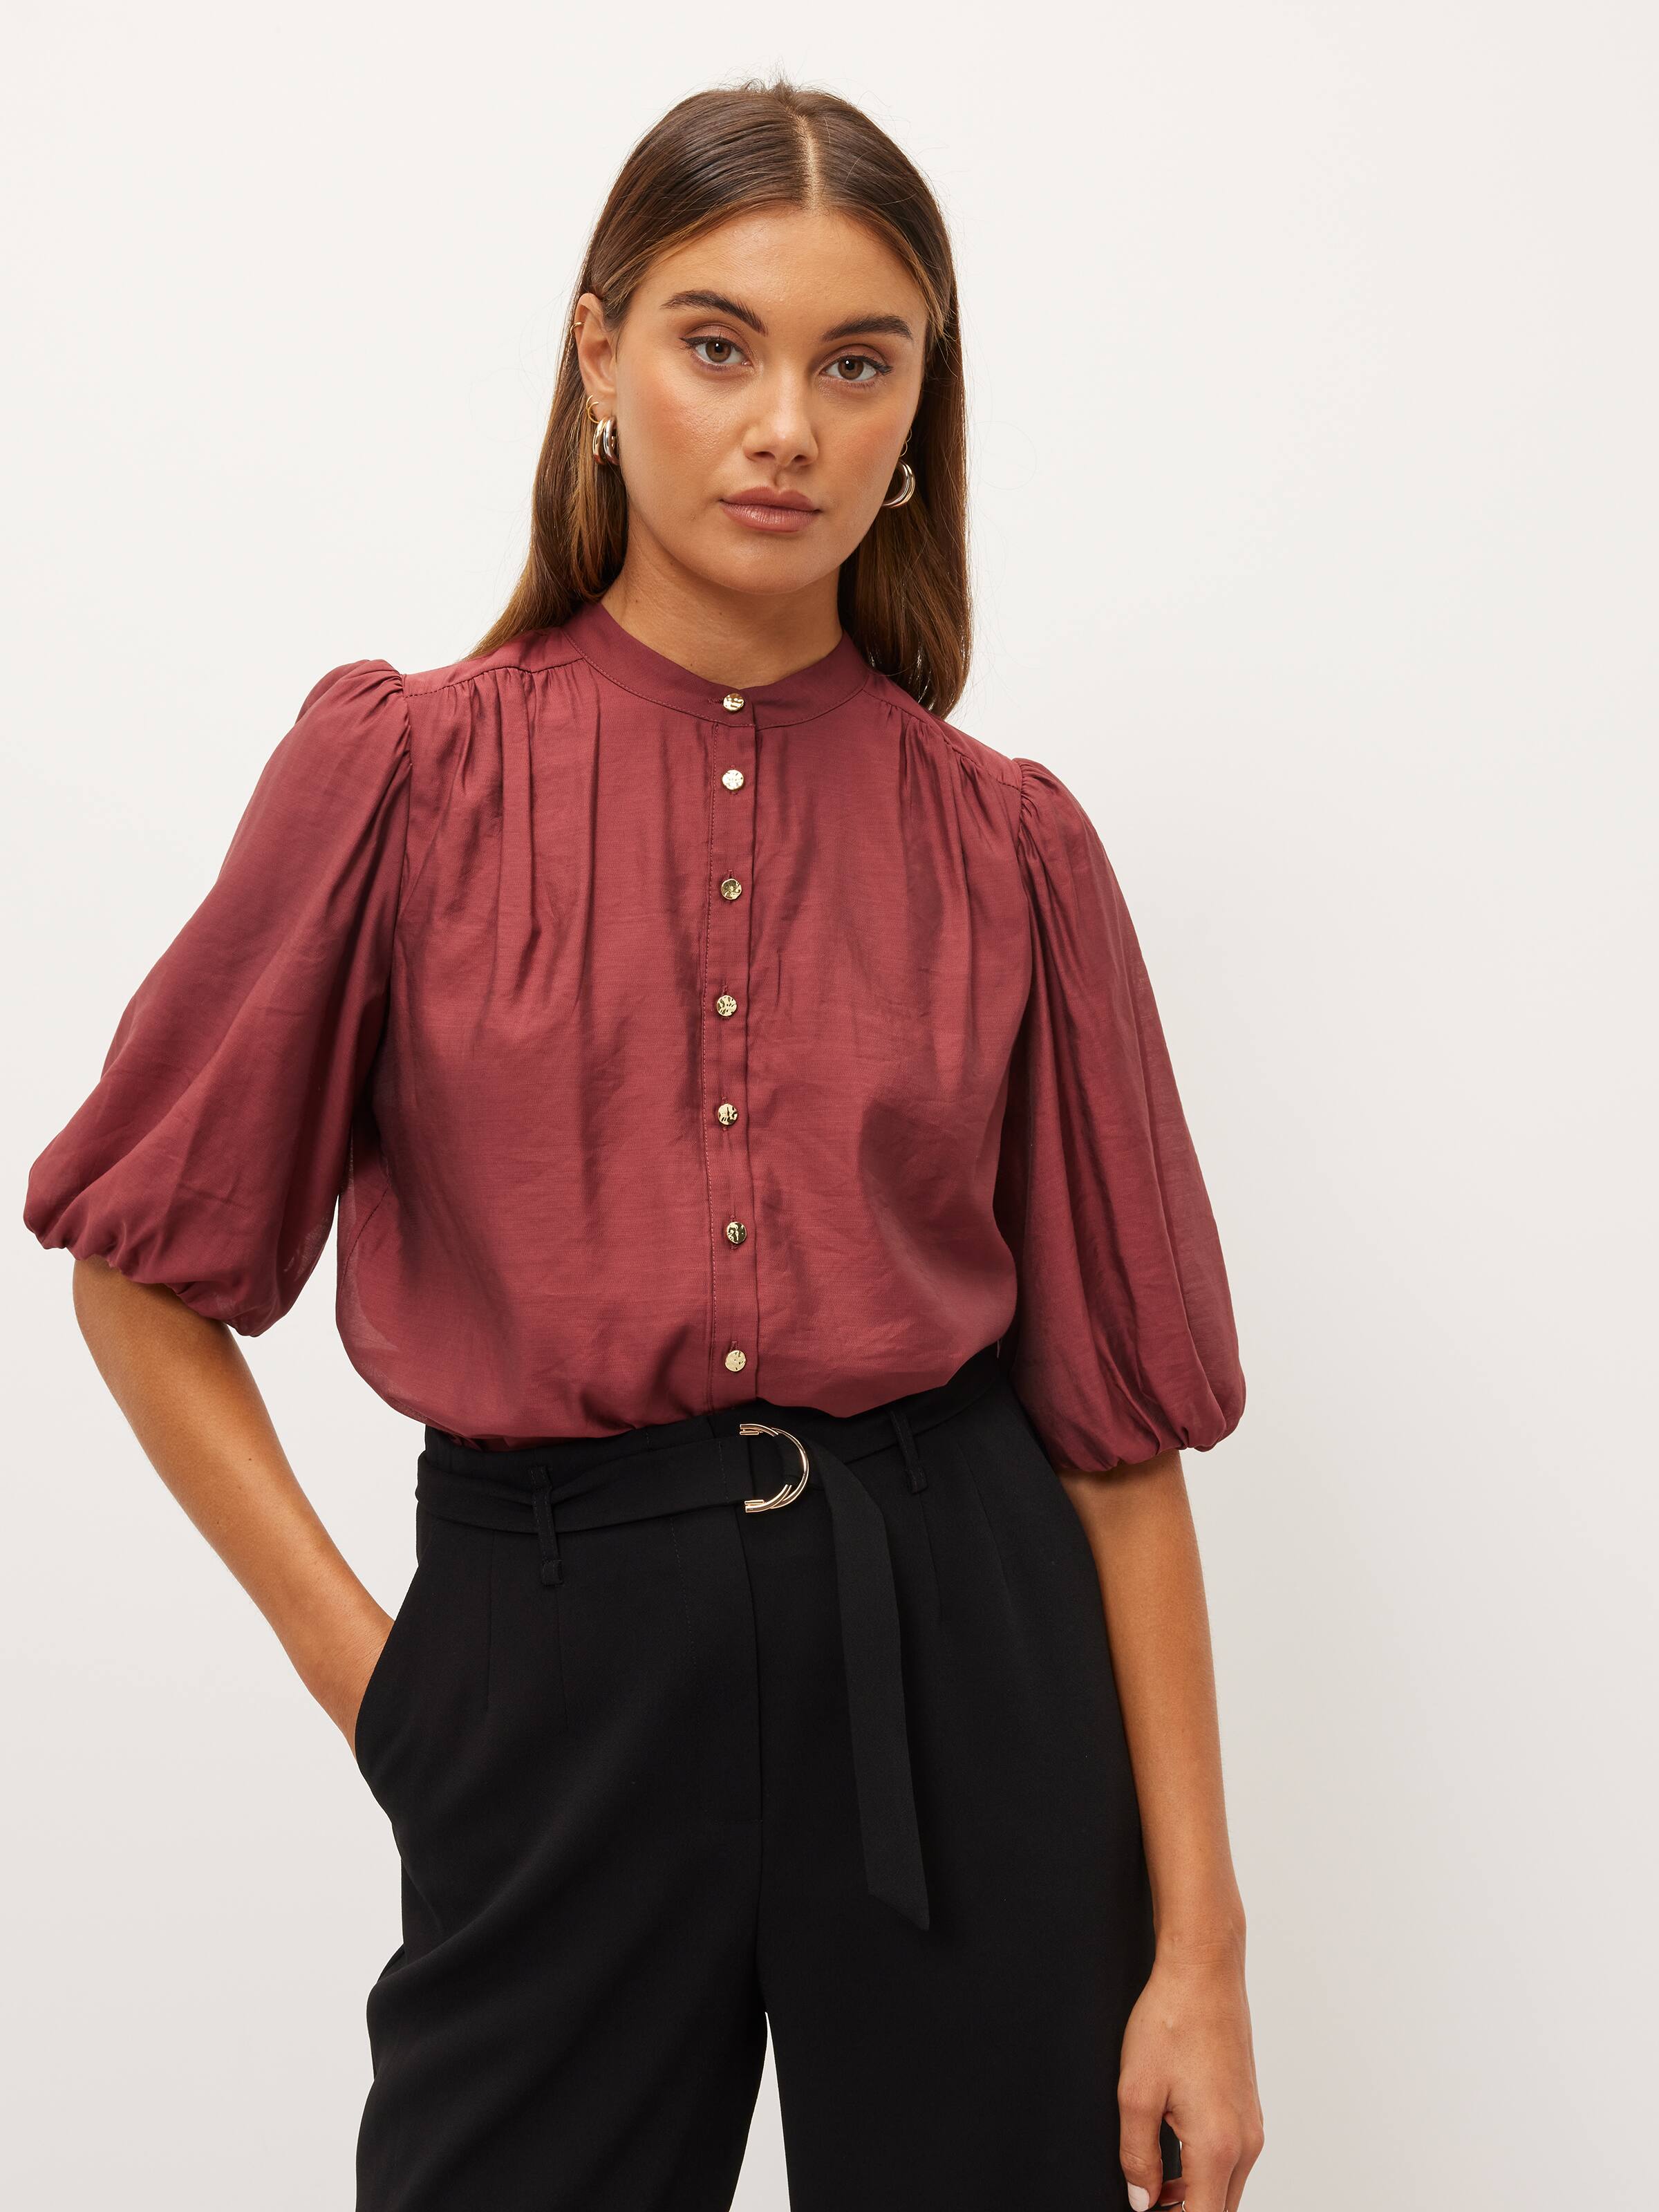 Shirts & Blouses - Pussy Bow, Tie Neck Blouses & Work Tops